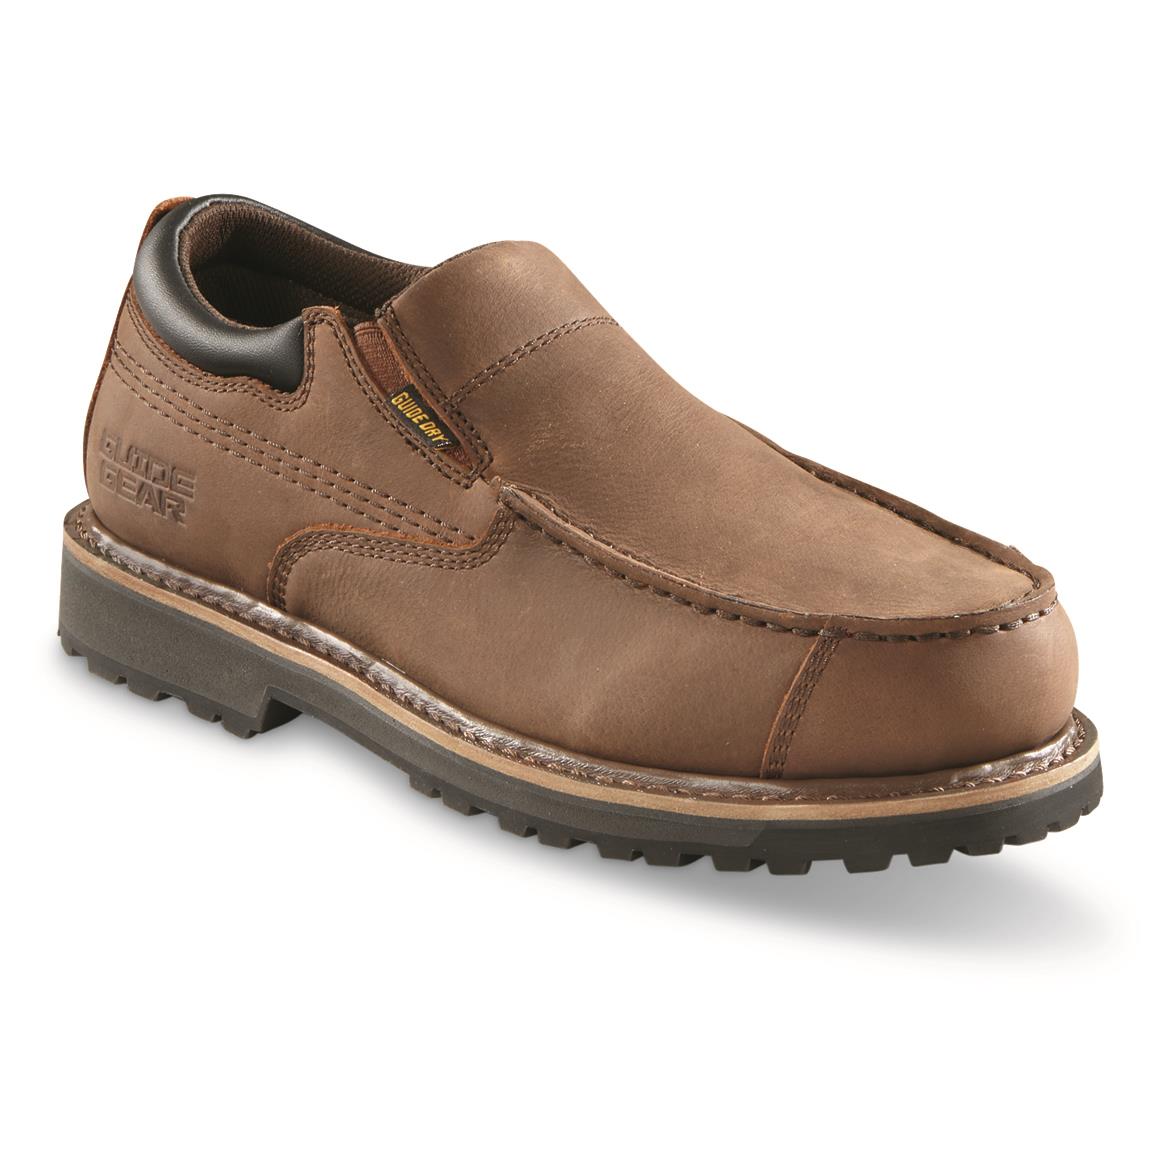 Guide Gear Men's Rugged Timber Waterproof Slip-on Shoes, Canteen Brown